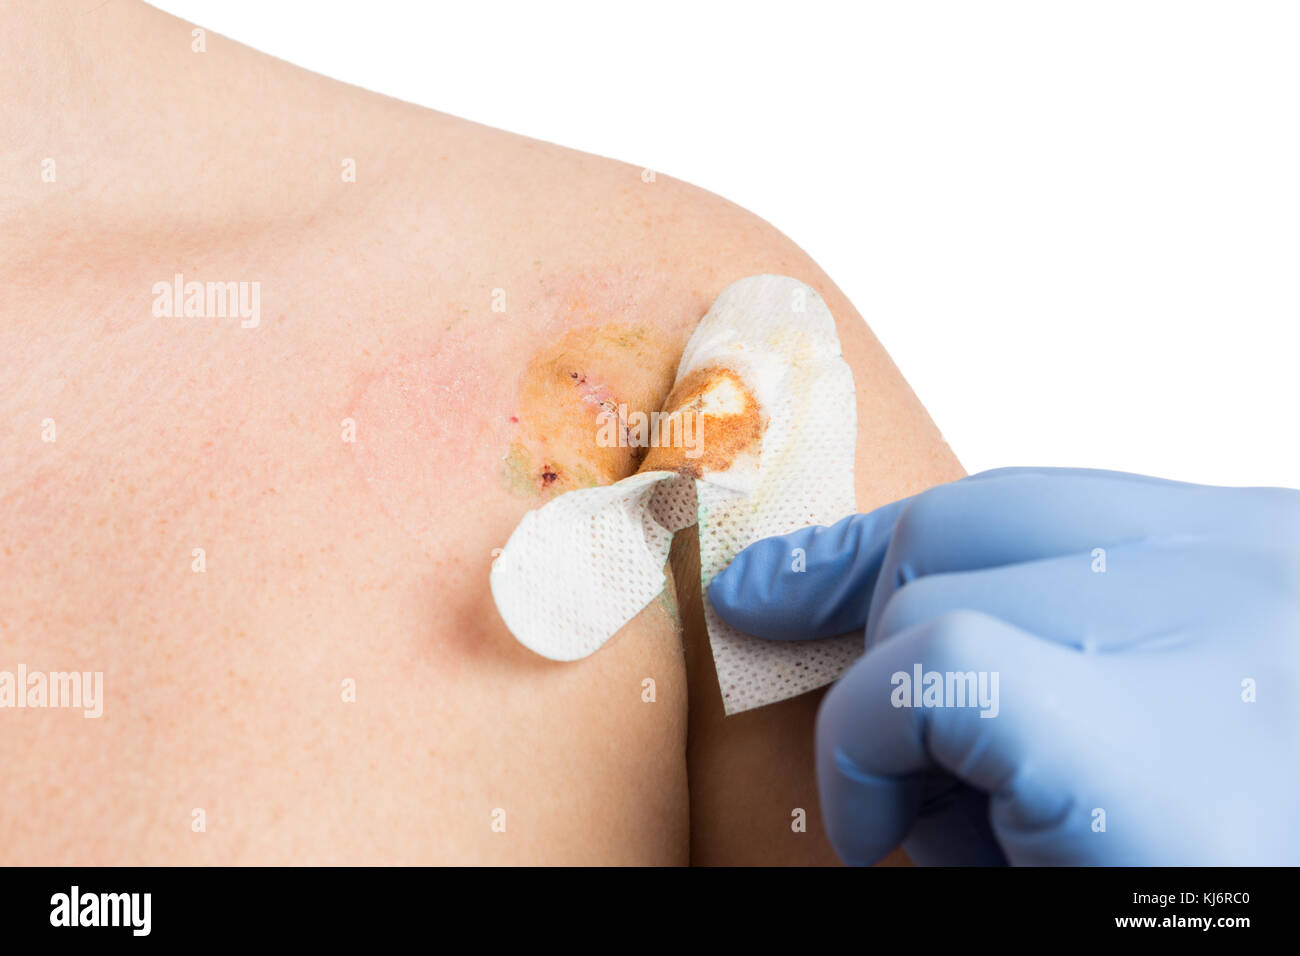 Doctor hand removing bandage after mole removal surgery and checking stitches Stock Photo